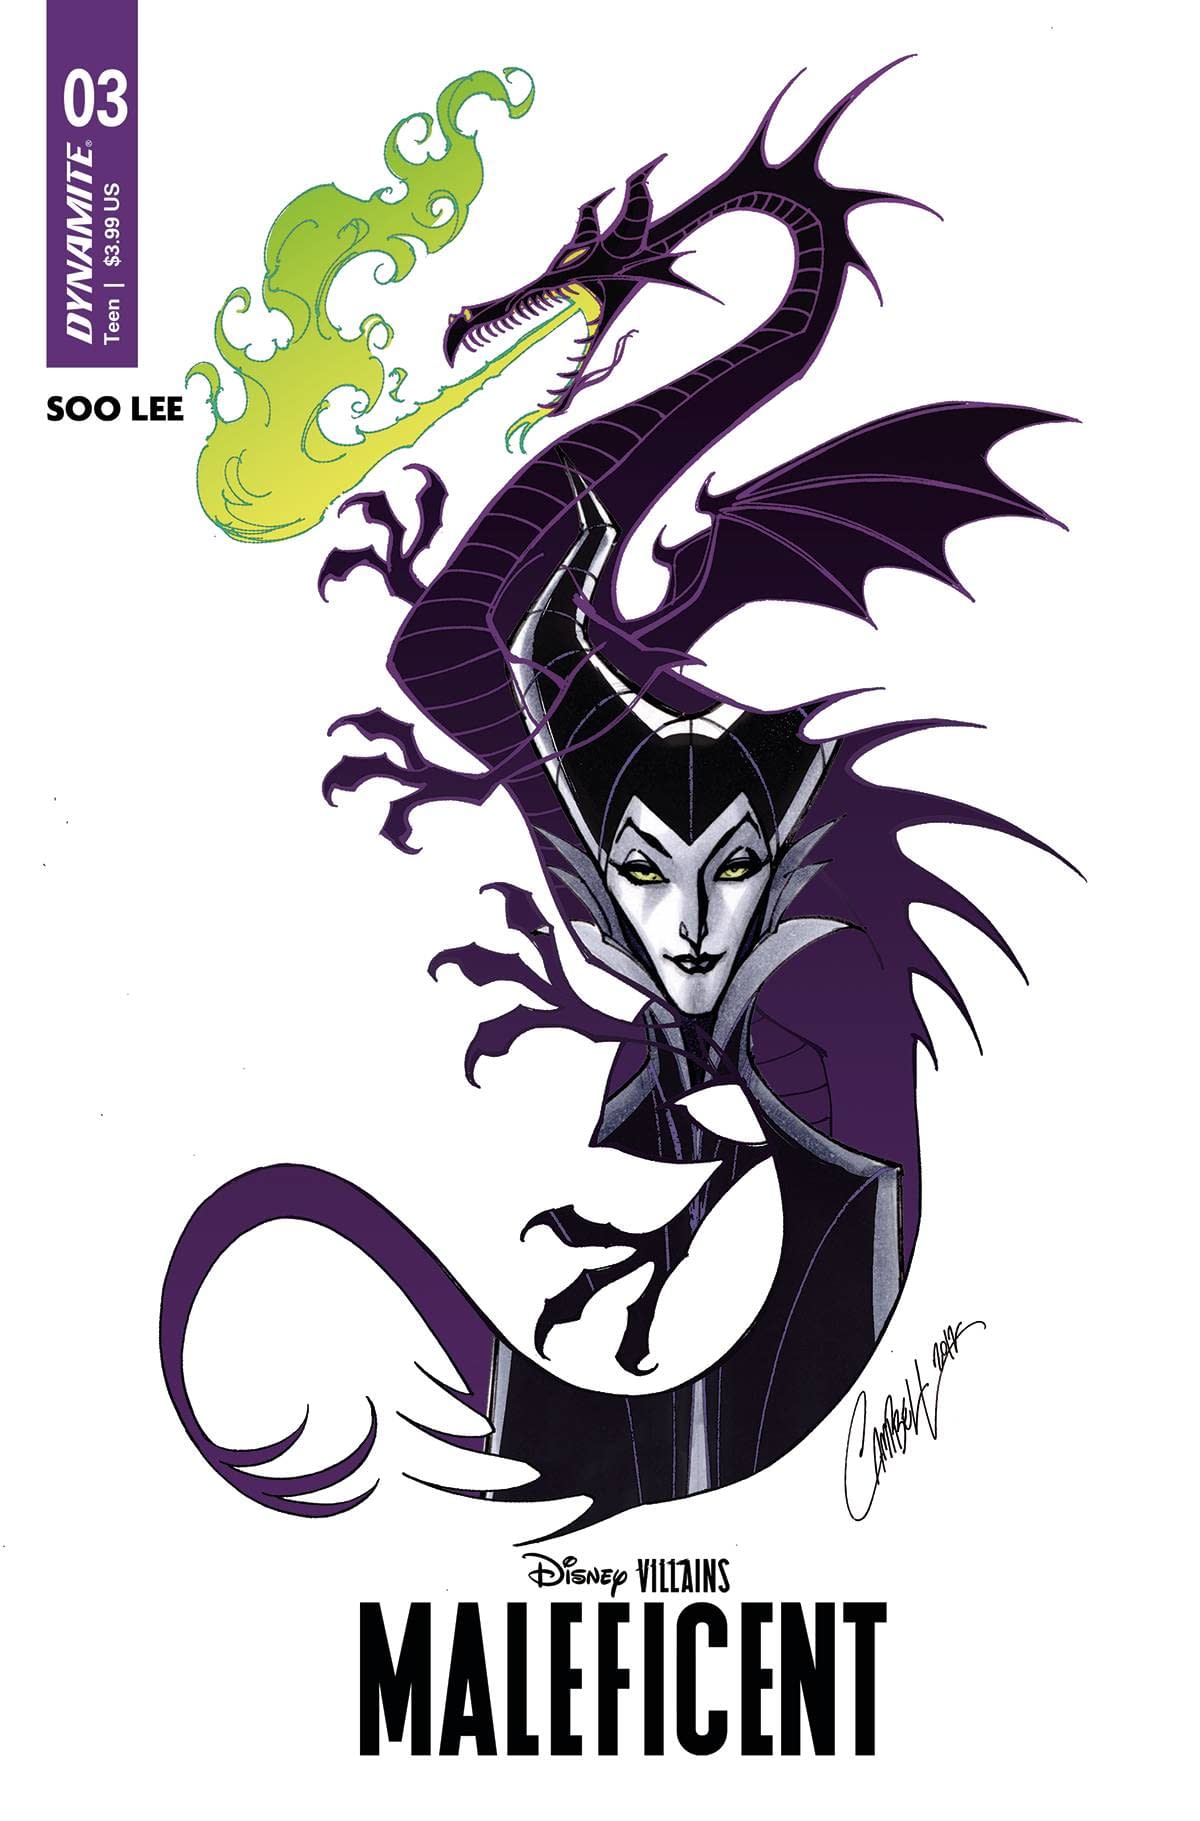 Disney Villains: Maleficent #3 Preview: Mercy or Murder, Crow's Choice